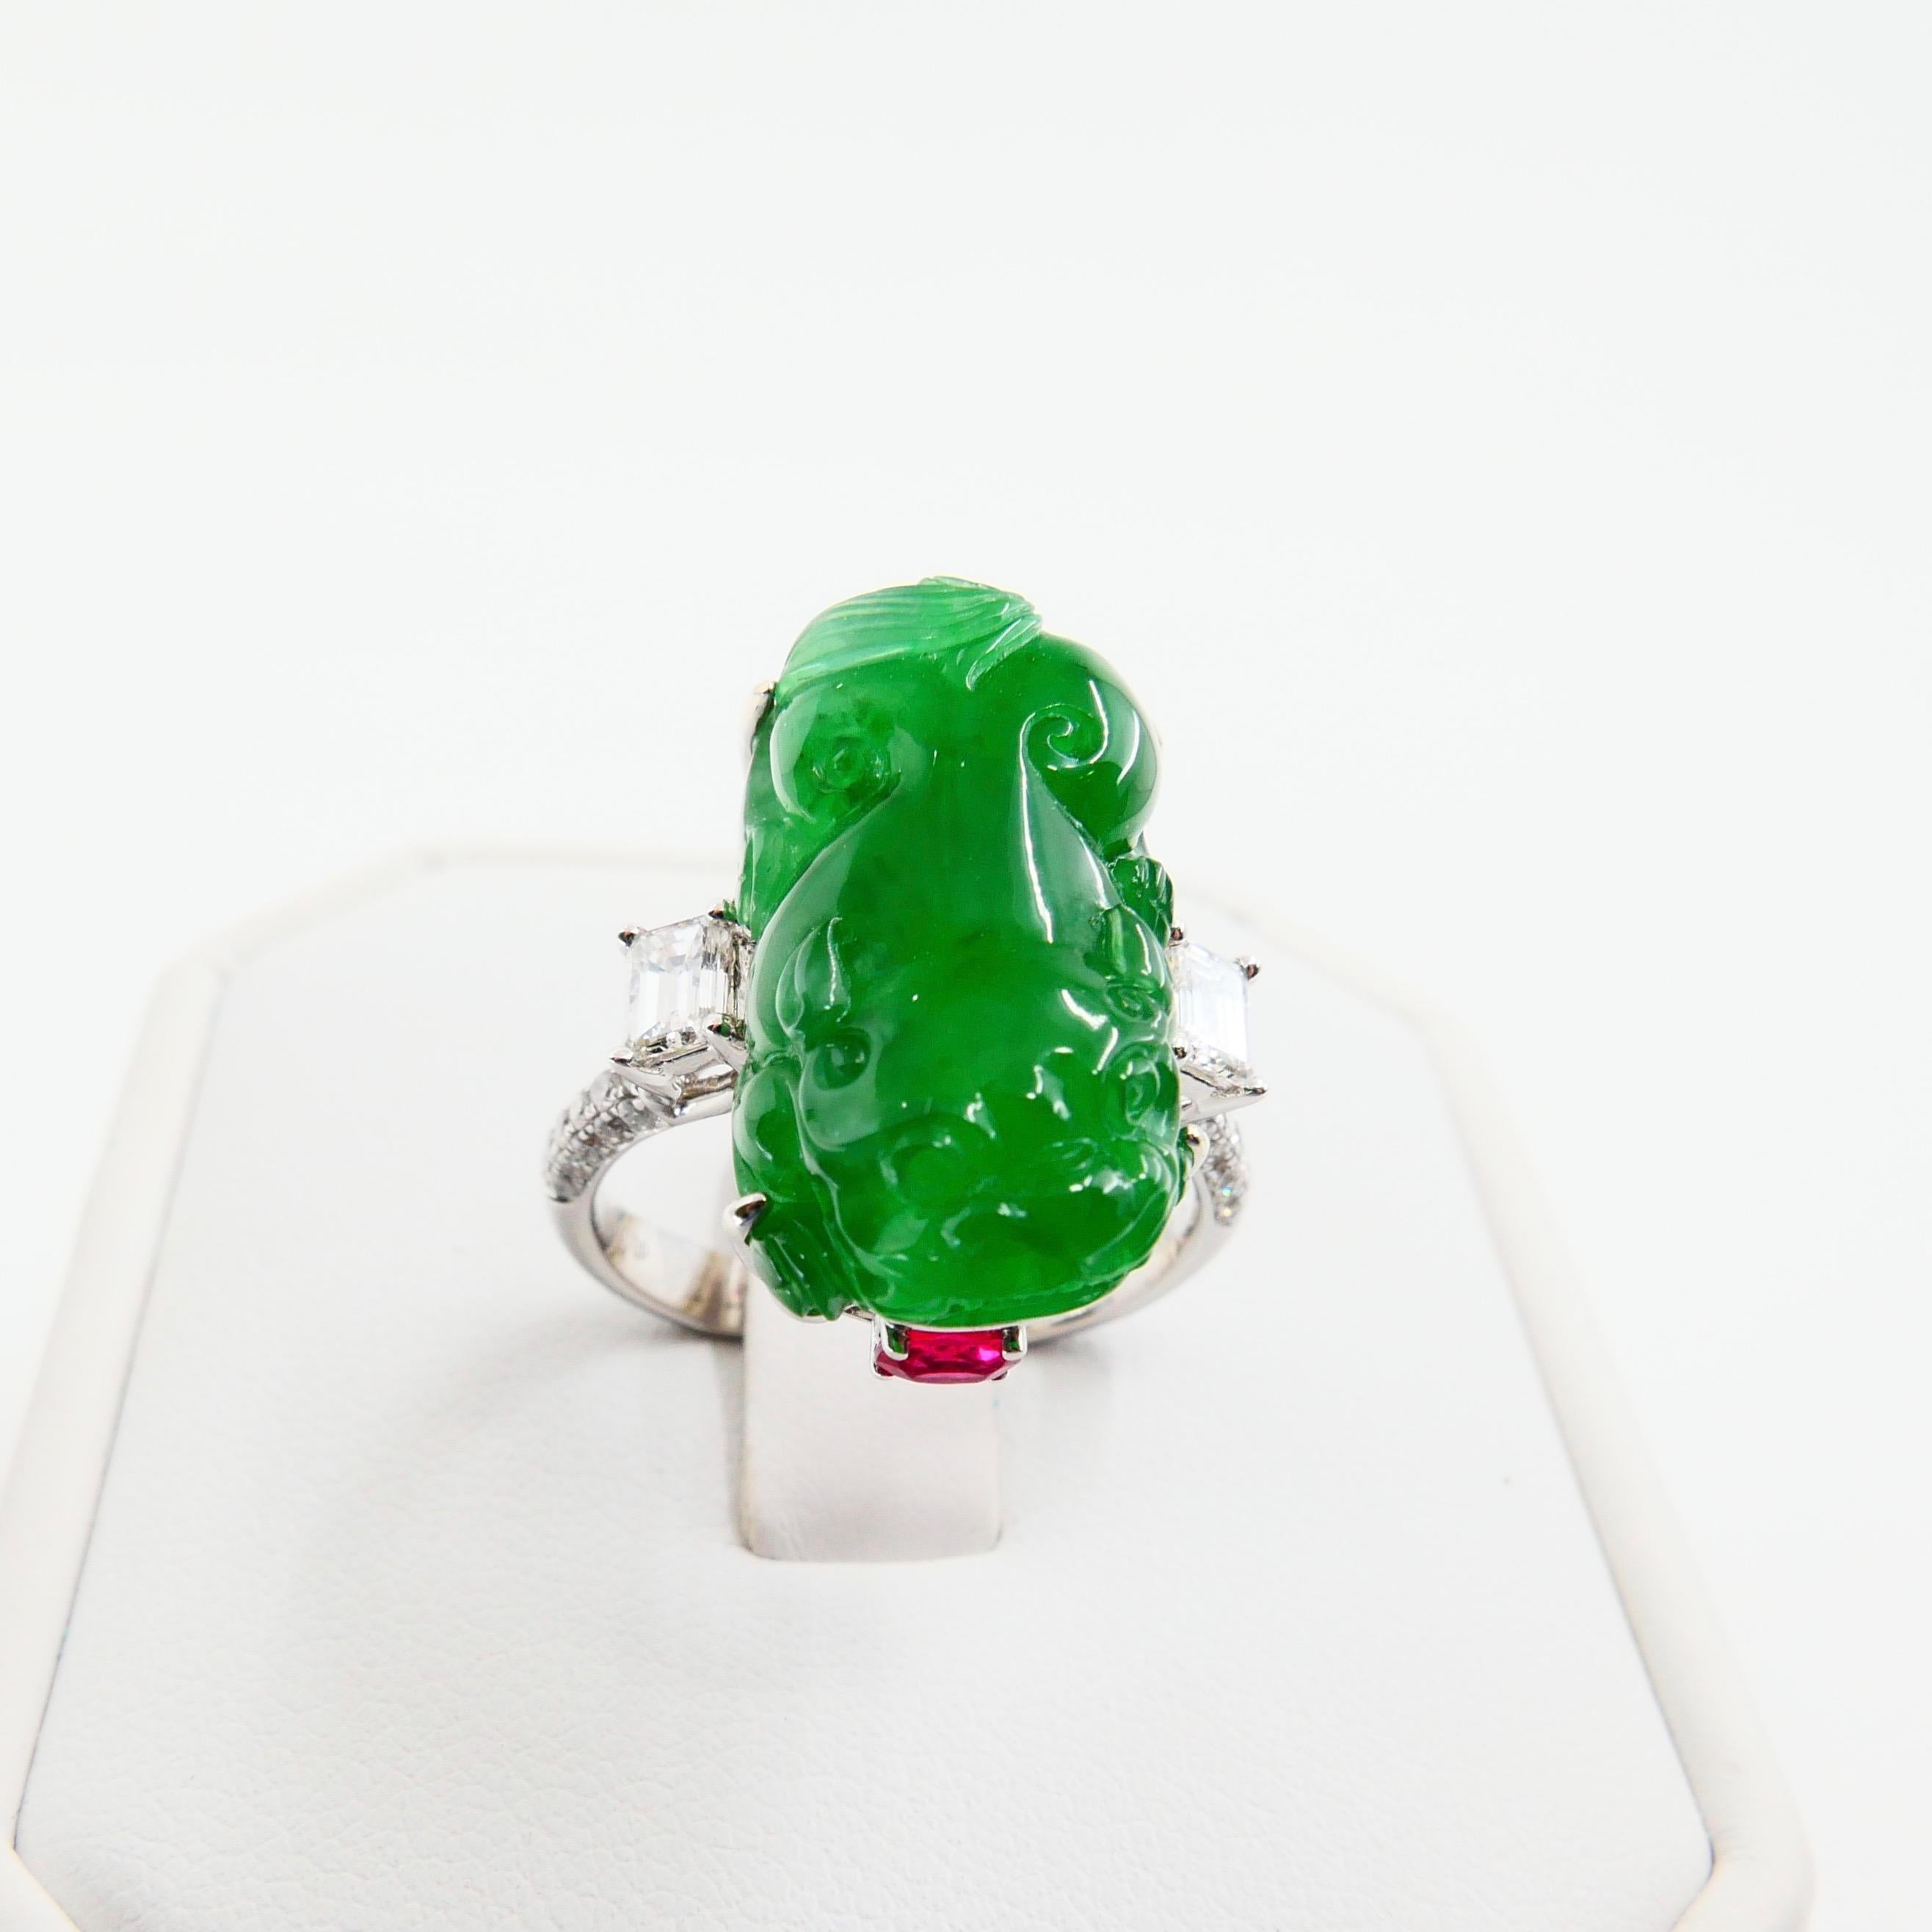 Women's Certified Type A Jadeite Jade Spinel and Diamond Ring, Super Vivid Green Color